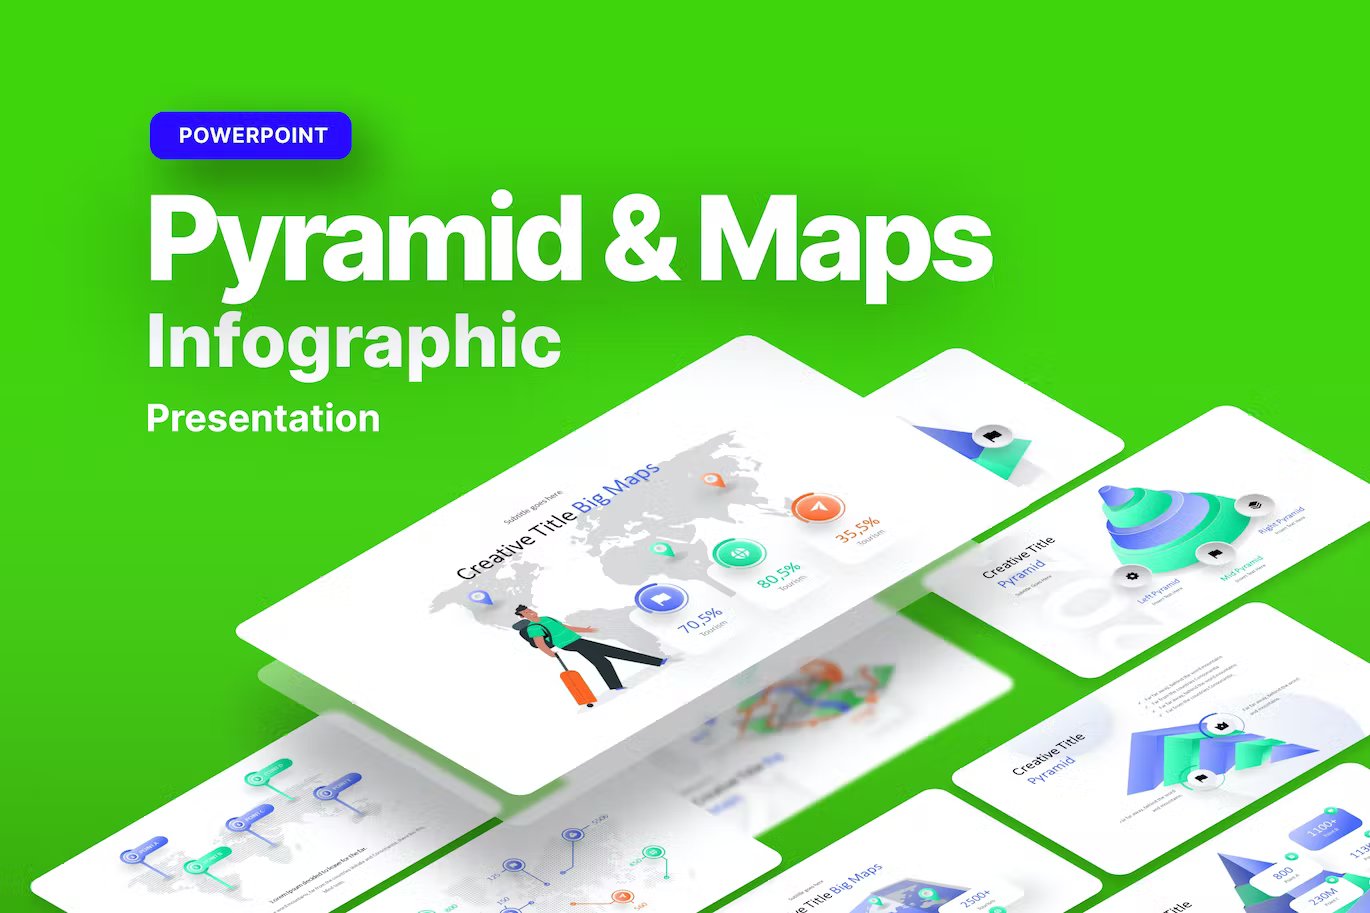 White lettering "Pyramid & Maps Infographic Presentation" and different presentation templates on a green background.